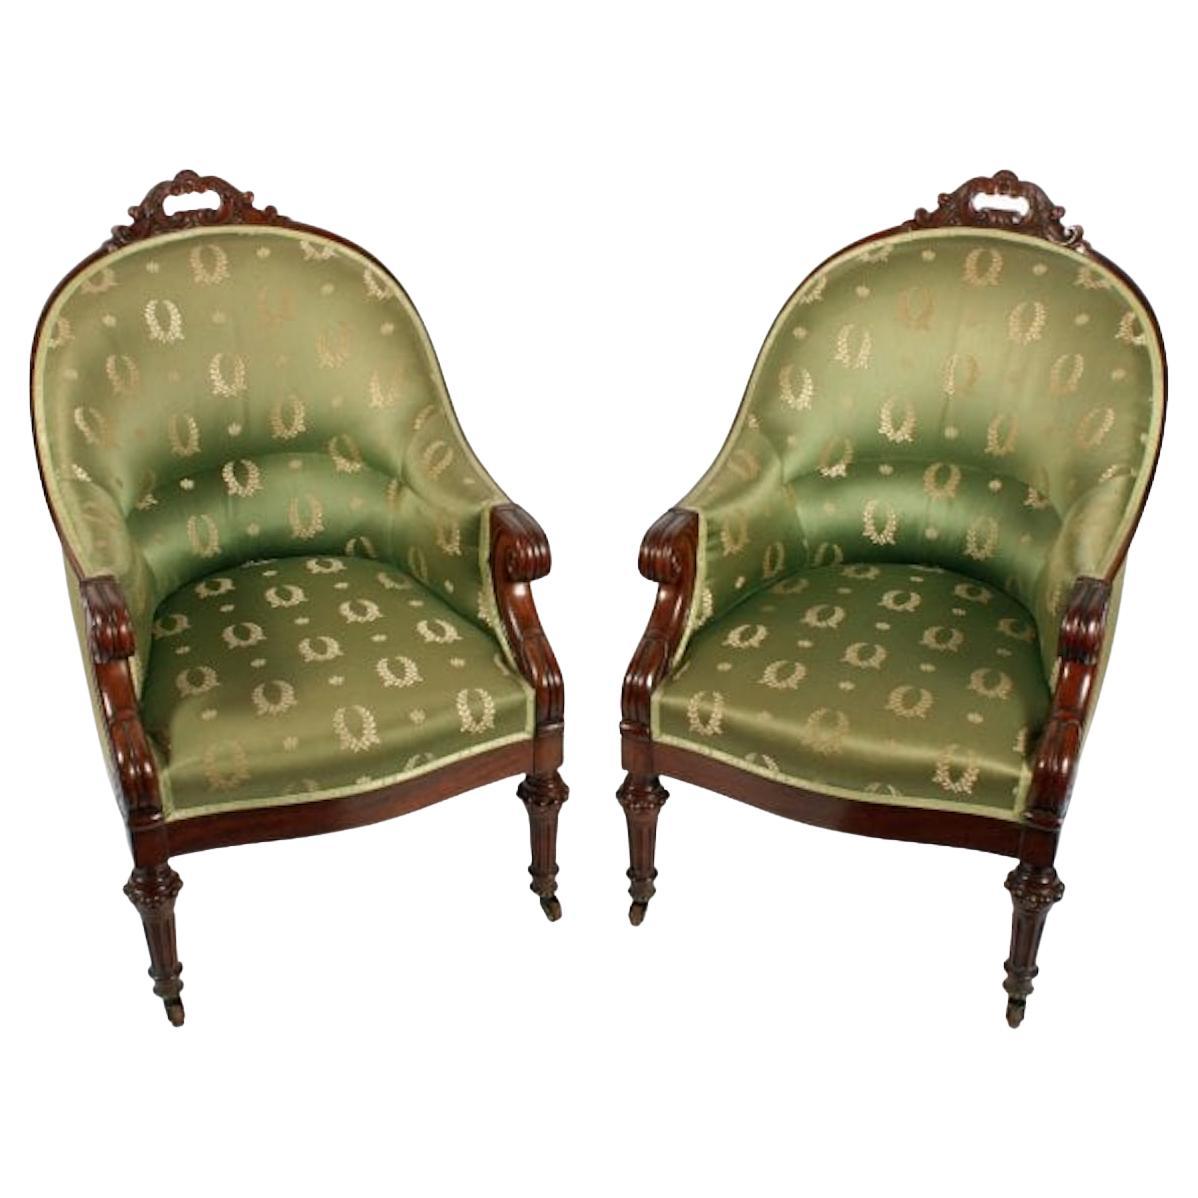 Pair of George IV Library Arm Chairs, Early 19th Century